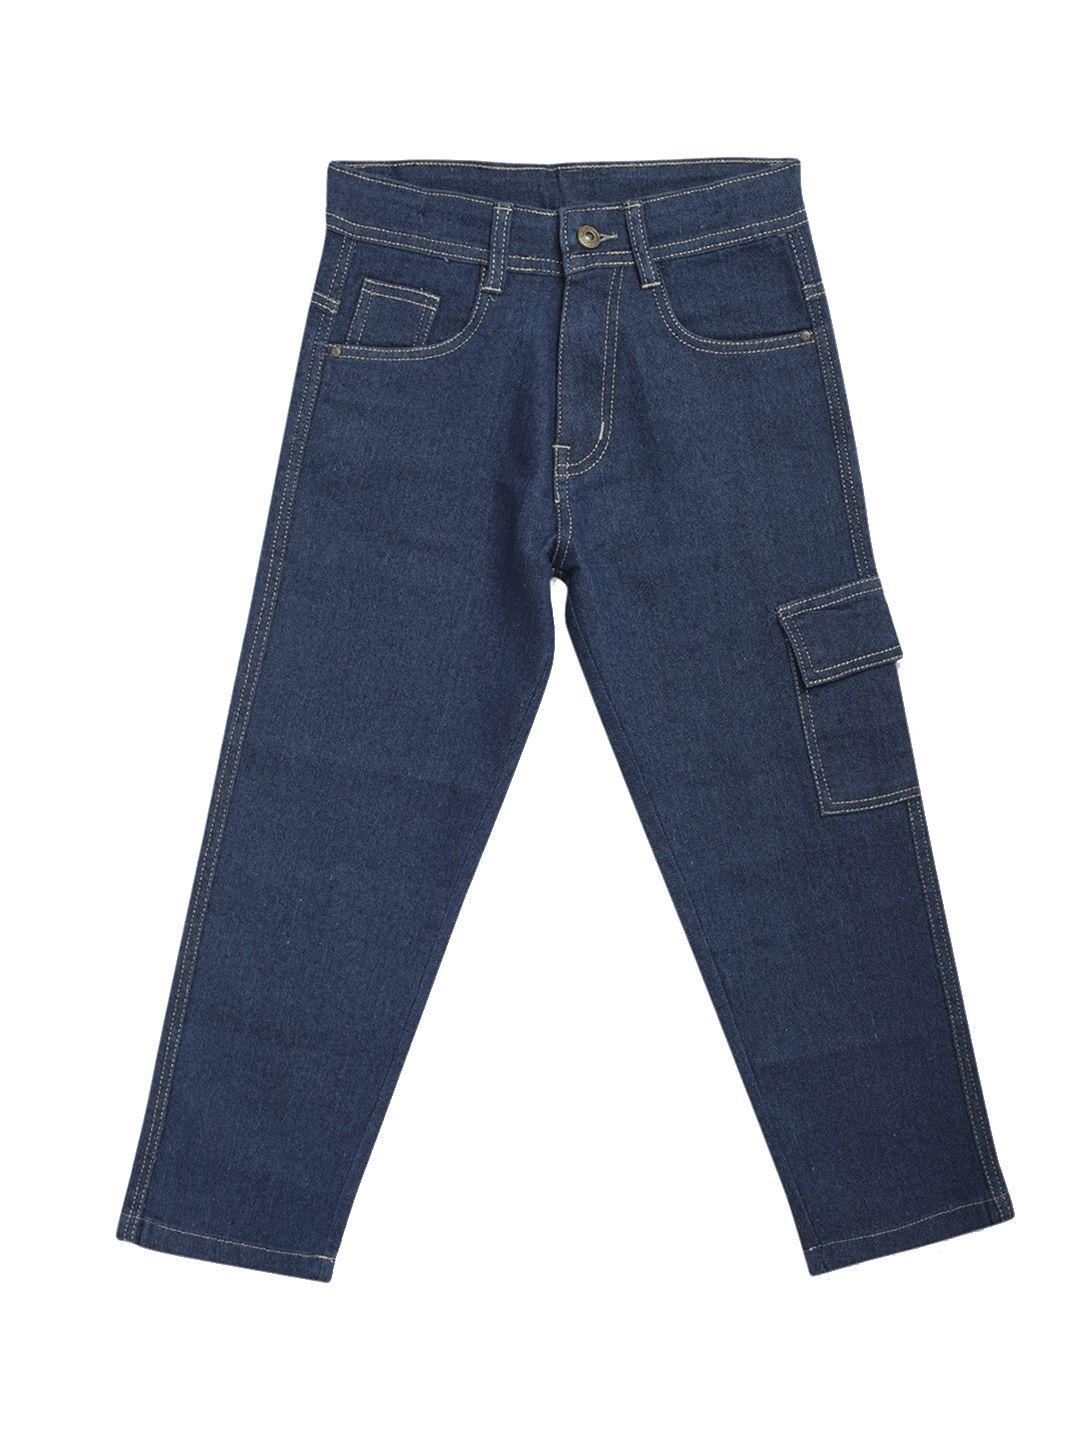 killer-boys-mid-rise-stretchable-jeans